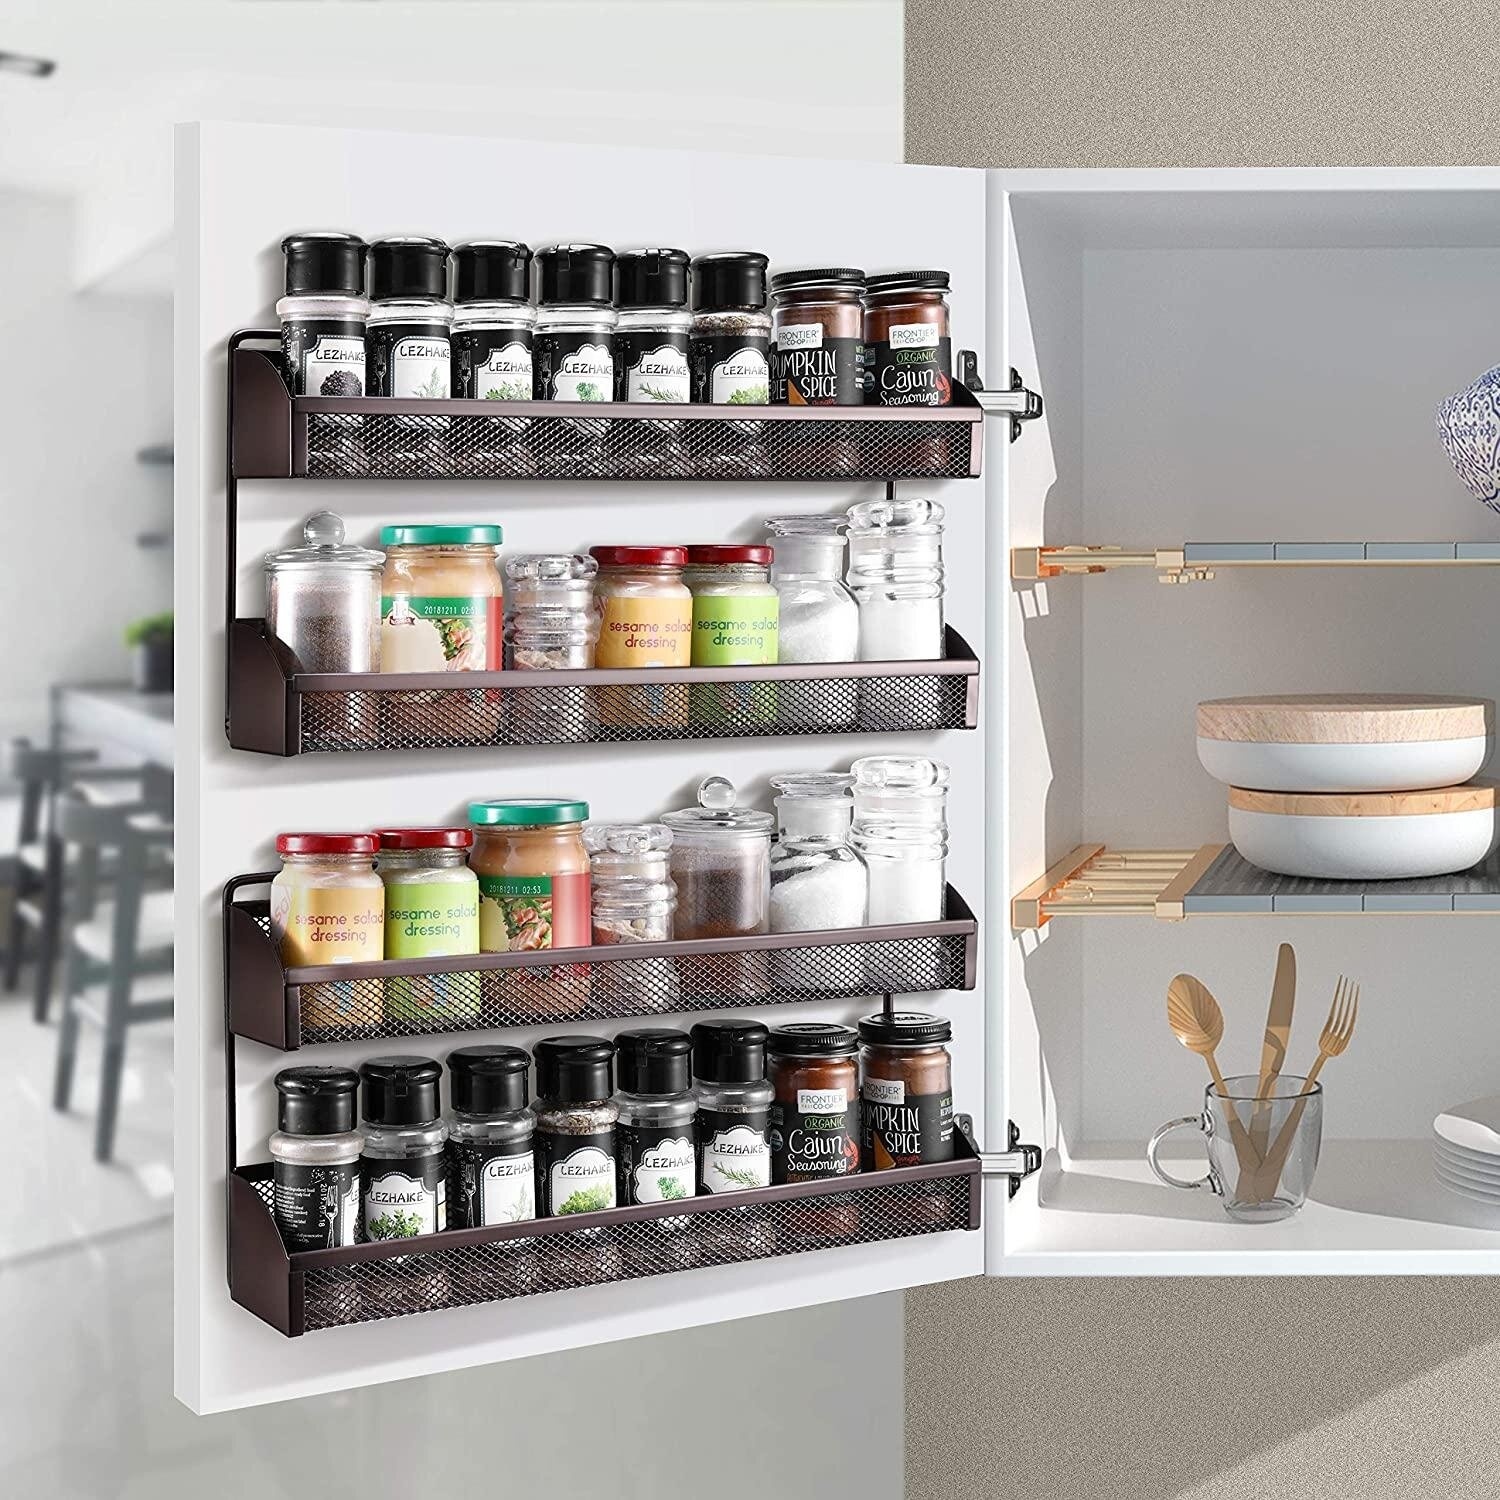 3-Tier Plastic Spice Rack - Cabinet Shelf Organizer for Kitchen Pantry (2-Pack)